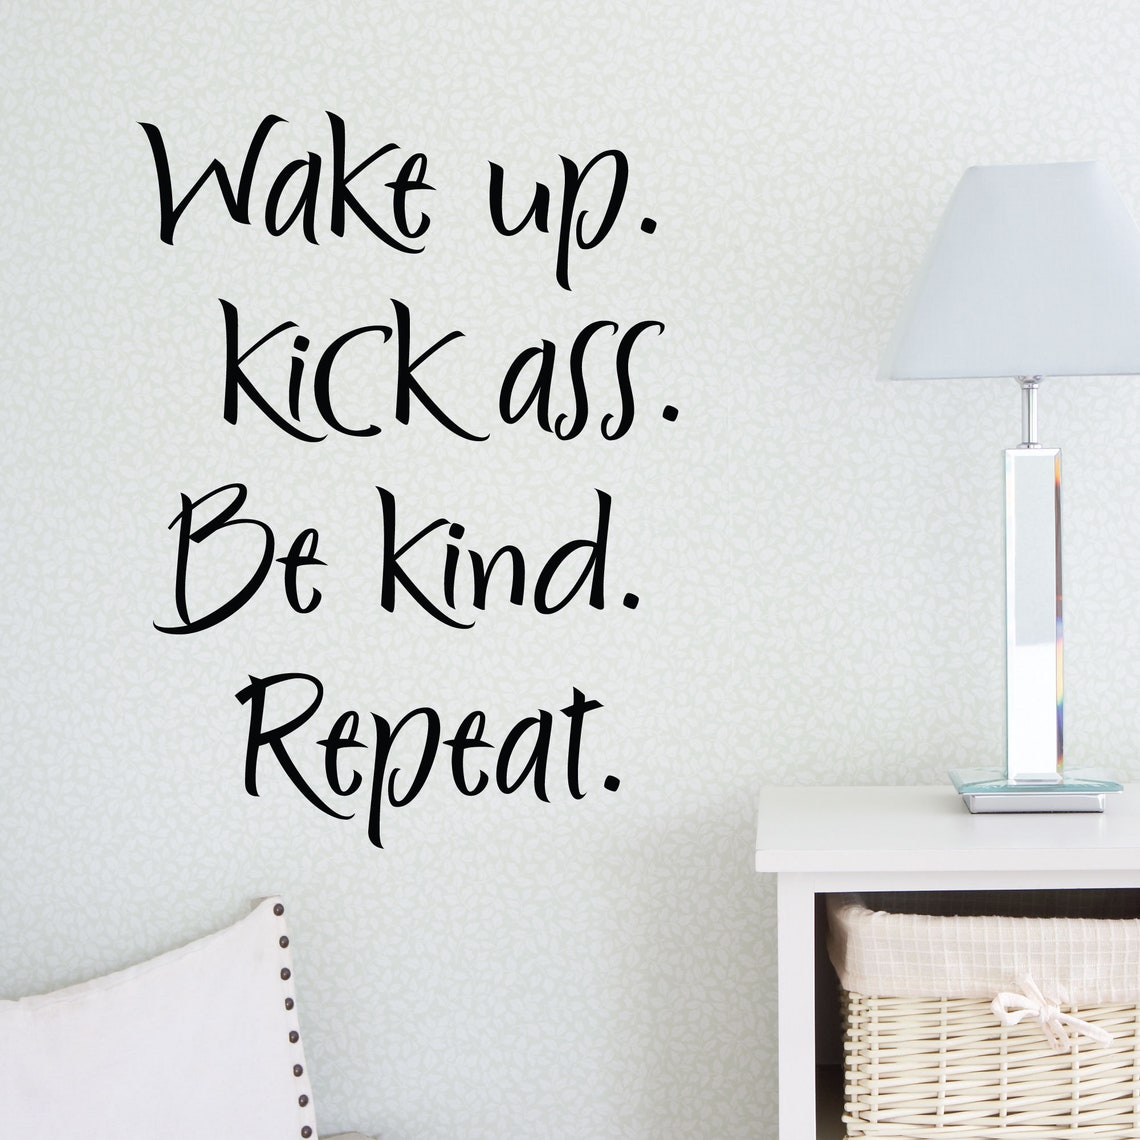 Wall Quotes Vinyl Decal Wake Up Kick Ass Be Kind Repeat Etsy